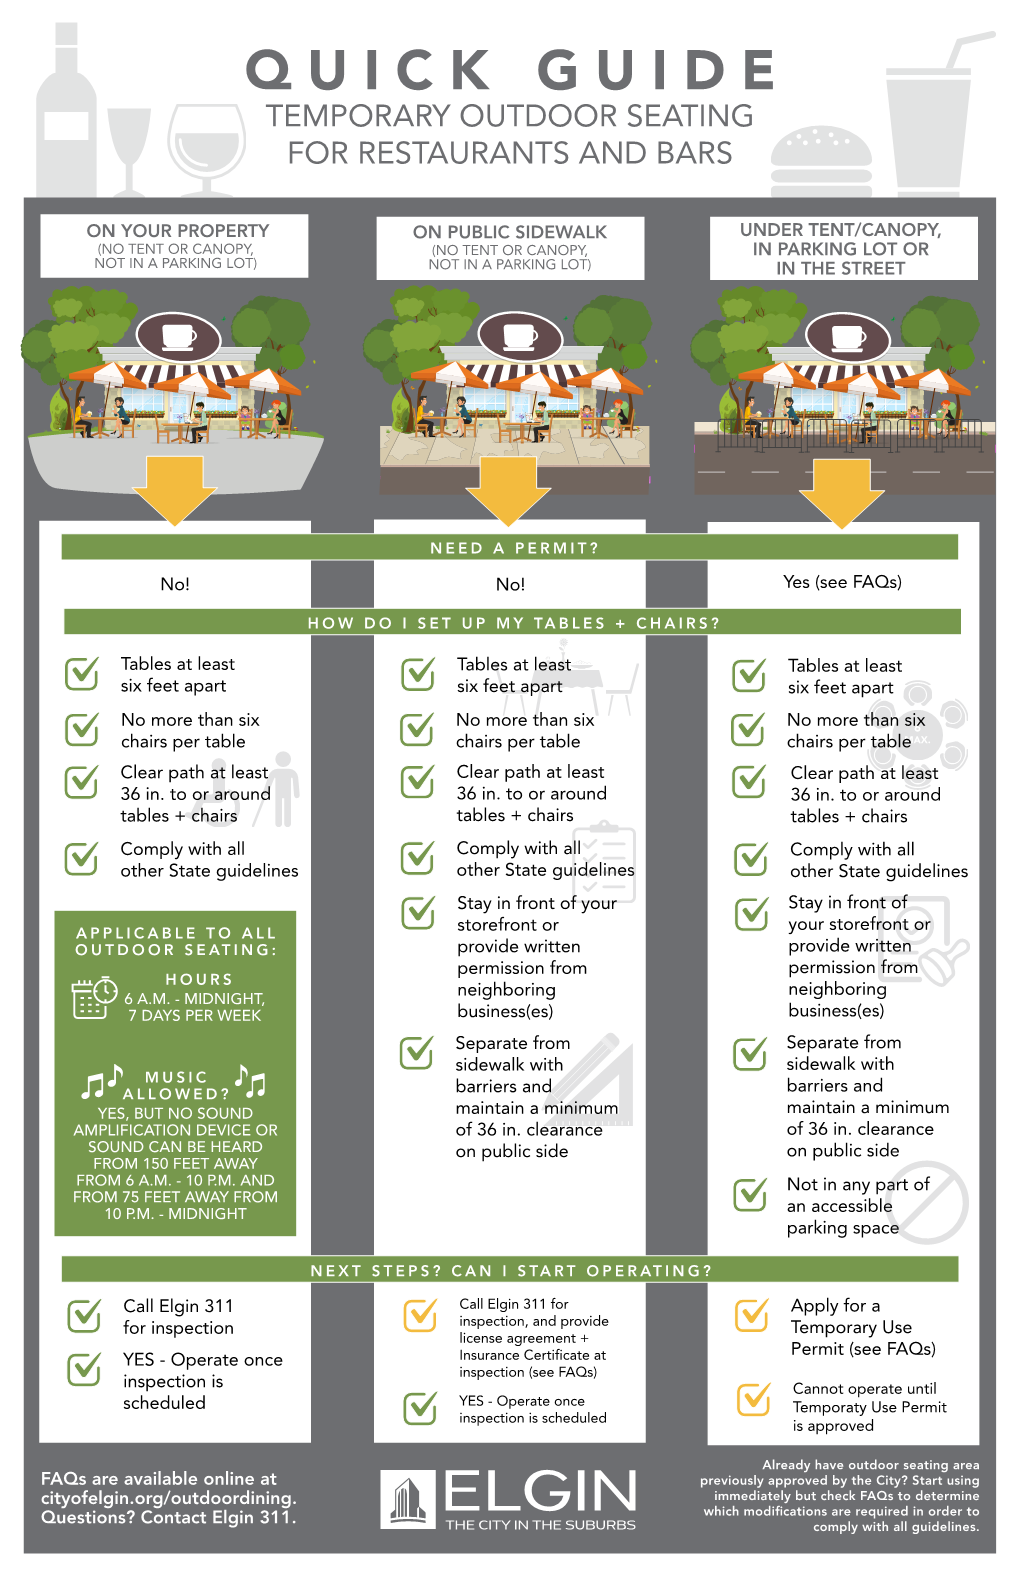 Quick Guide Temporary Outdoor Seating for Restaurants and Bars